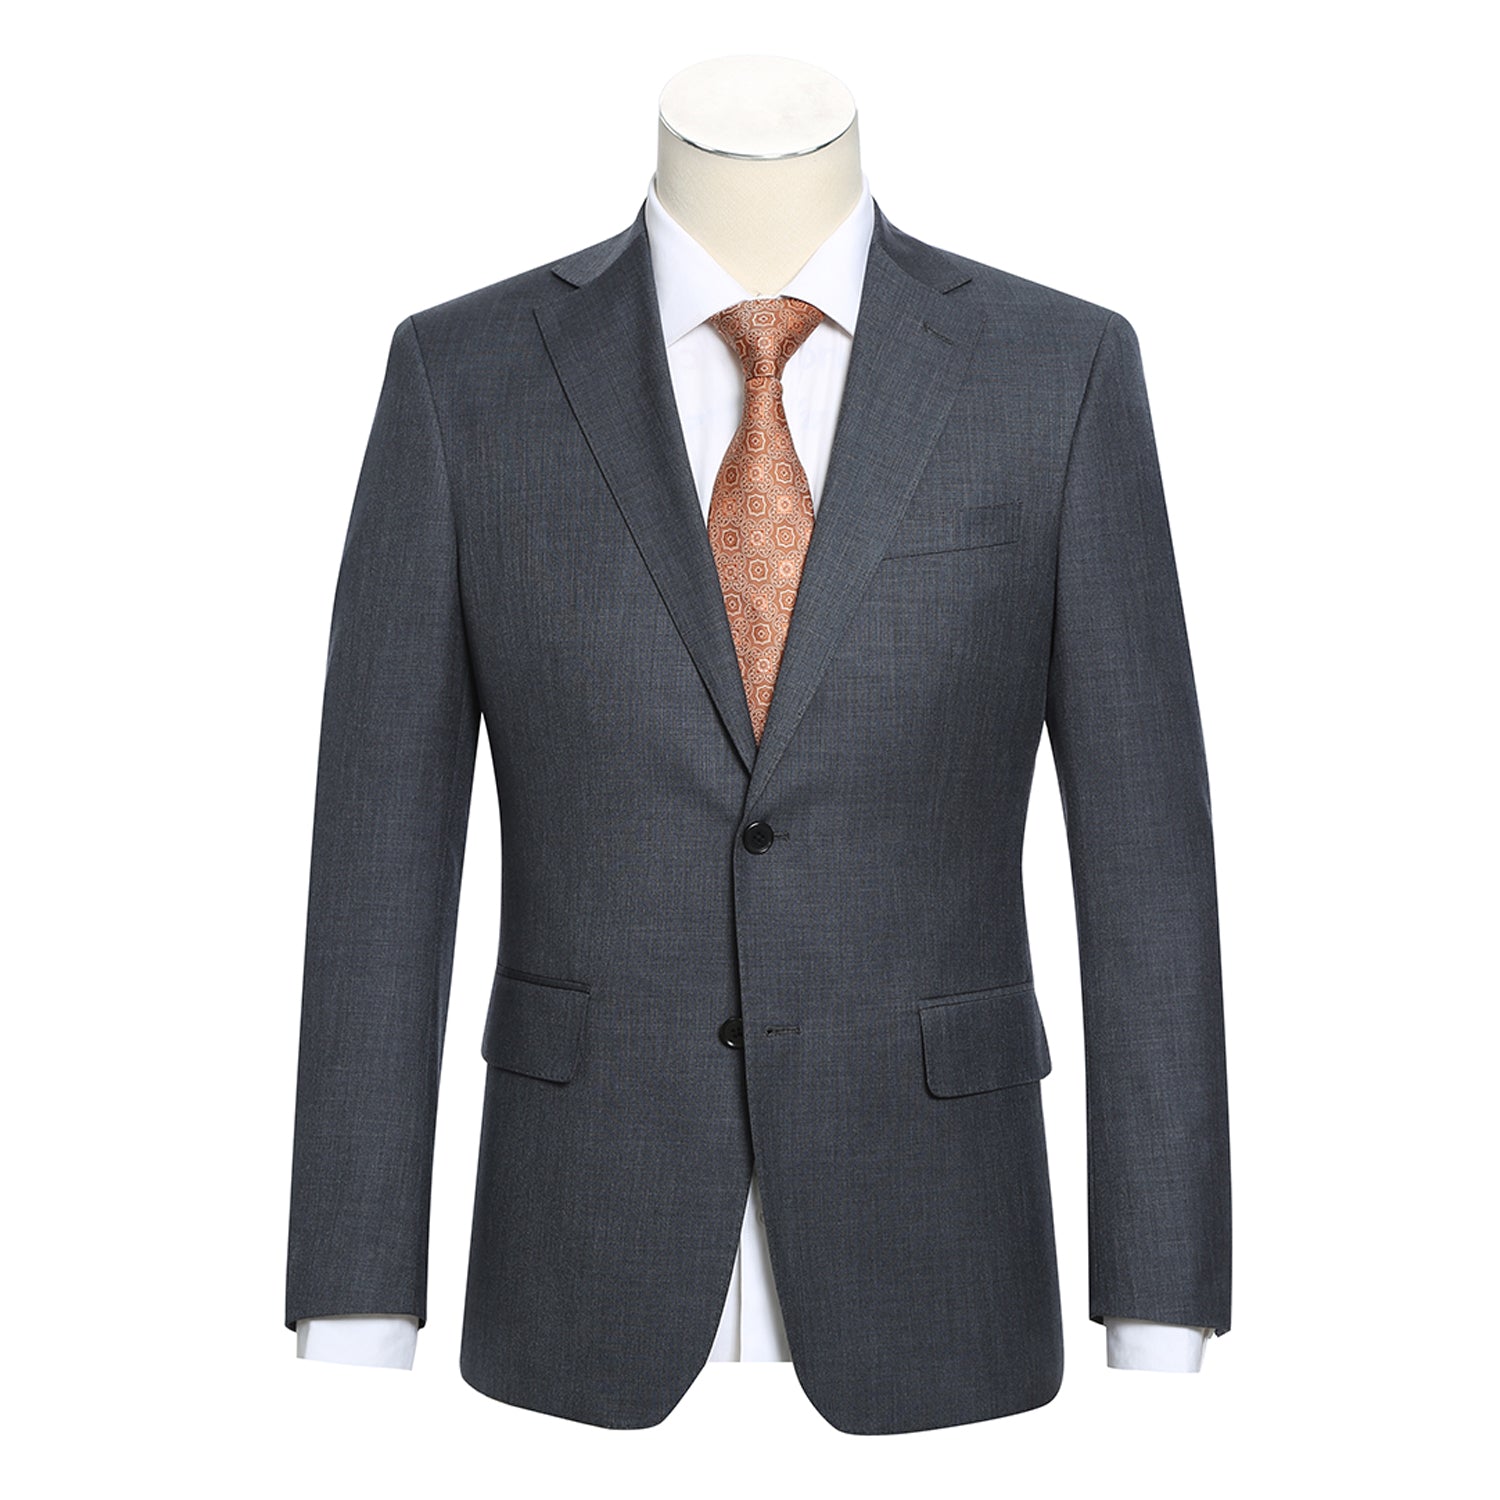 English Laundry Solid Charcoal Notch Suit 1